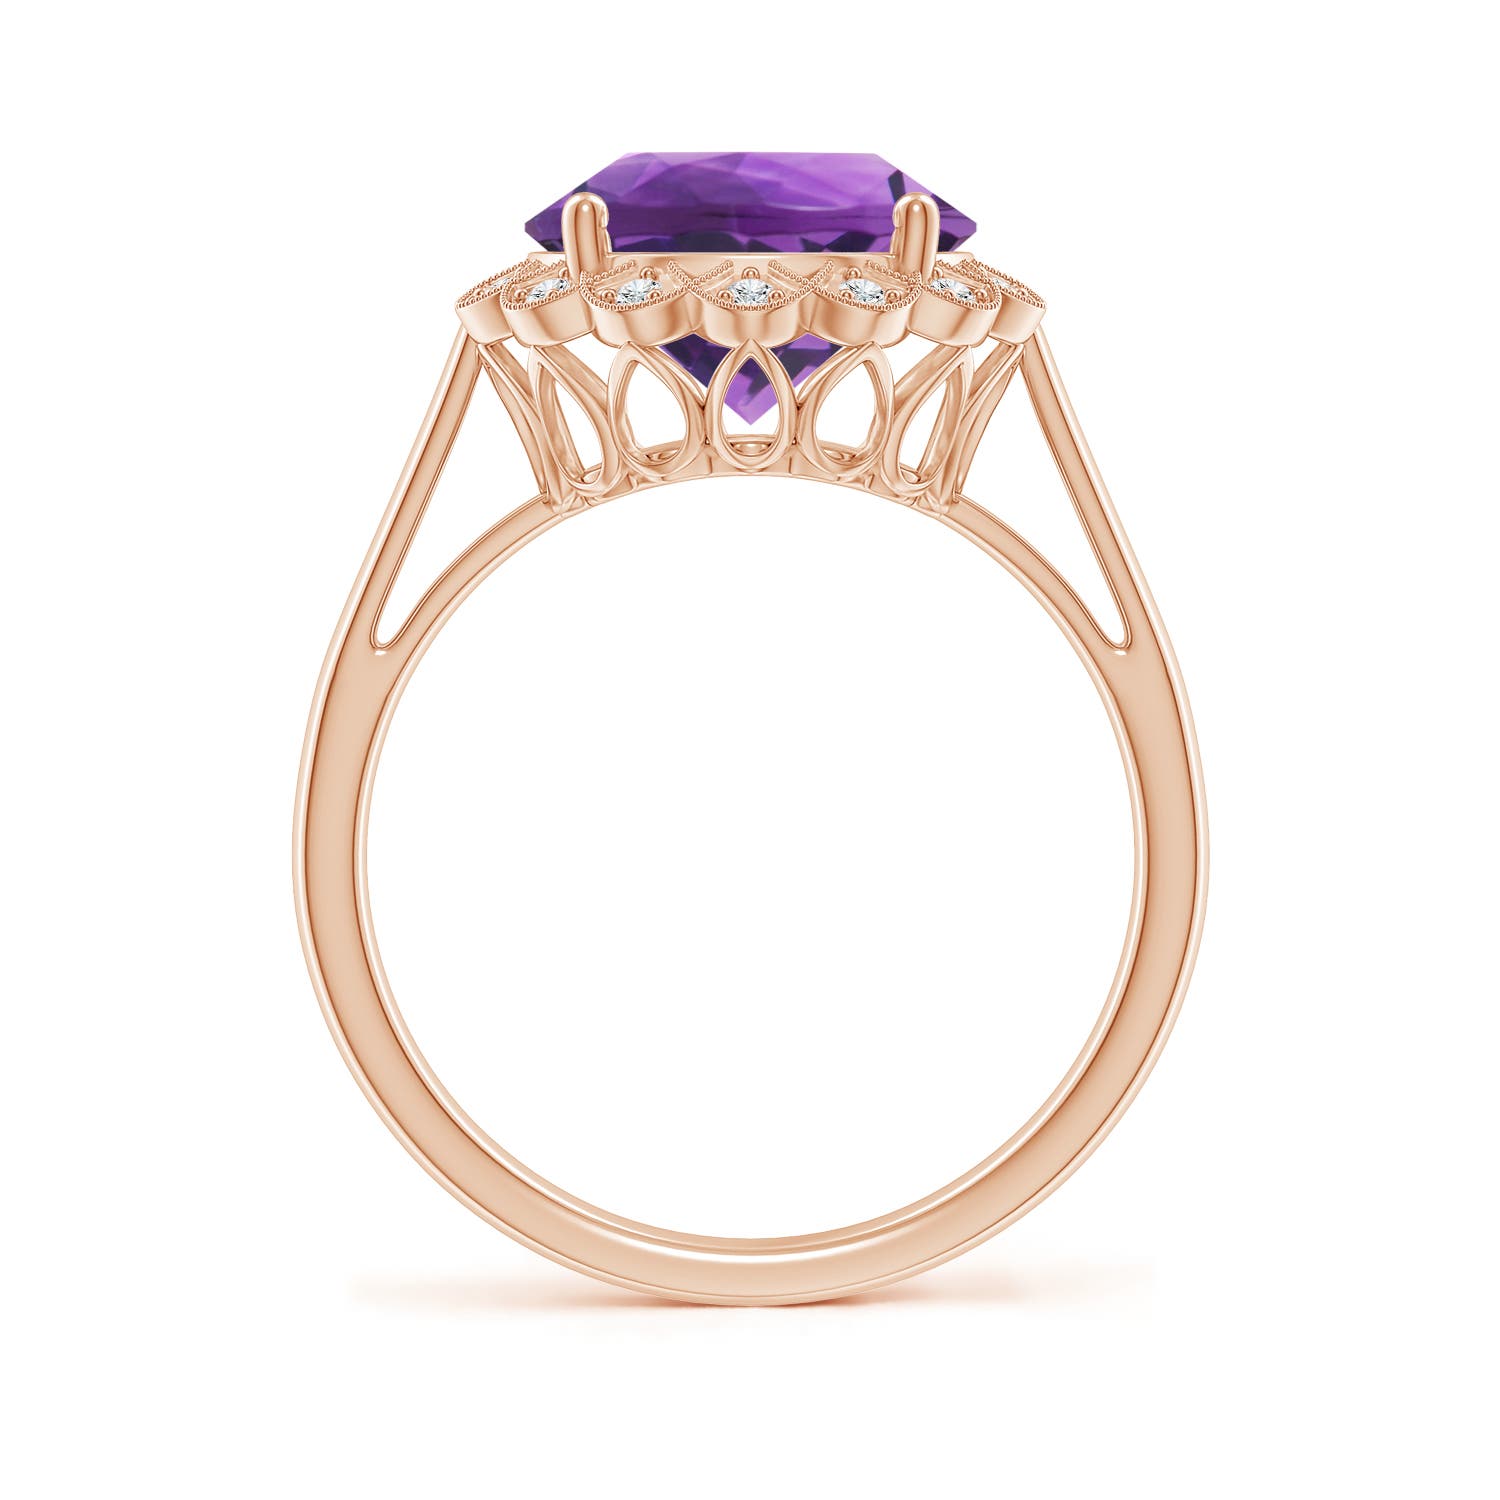 AAA- Amethyst / 3.28 CT / 14 KT Rose Gold